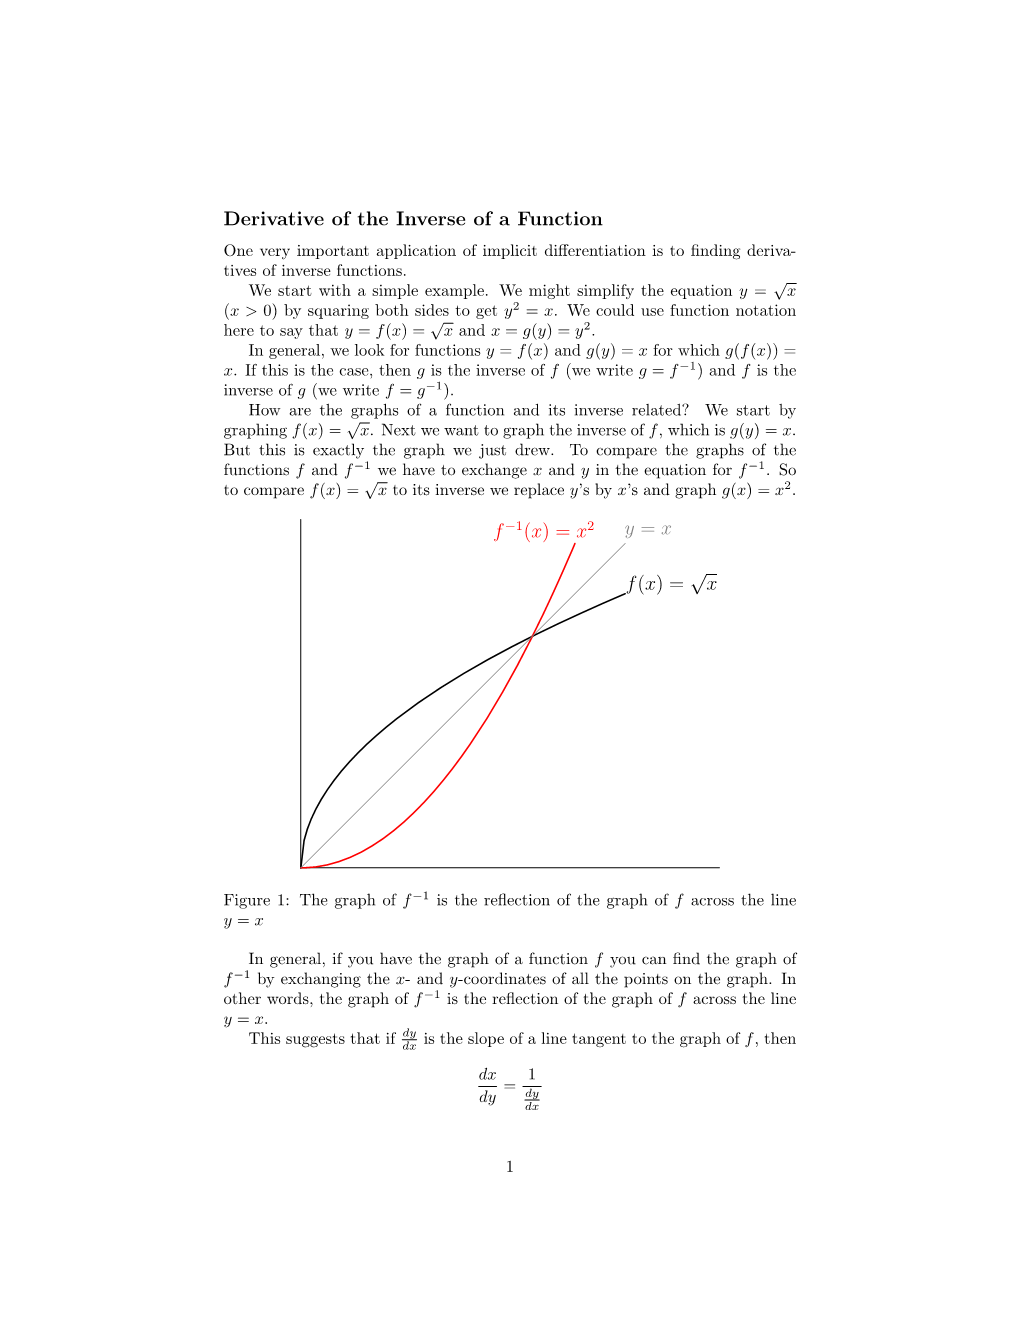 Derivative of the Inverse of a Function One Very Important Application of Implicit Diﬀerentiation Is to ﬁnding Deriva­ Tives of Inverse Functions